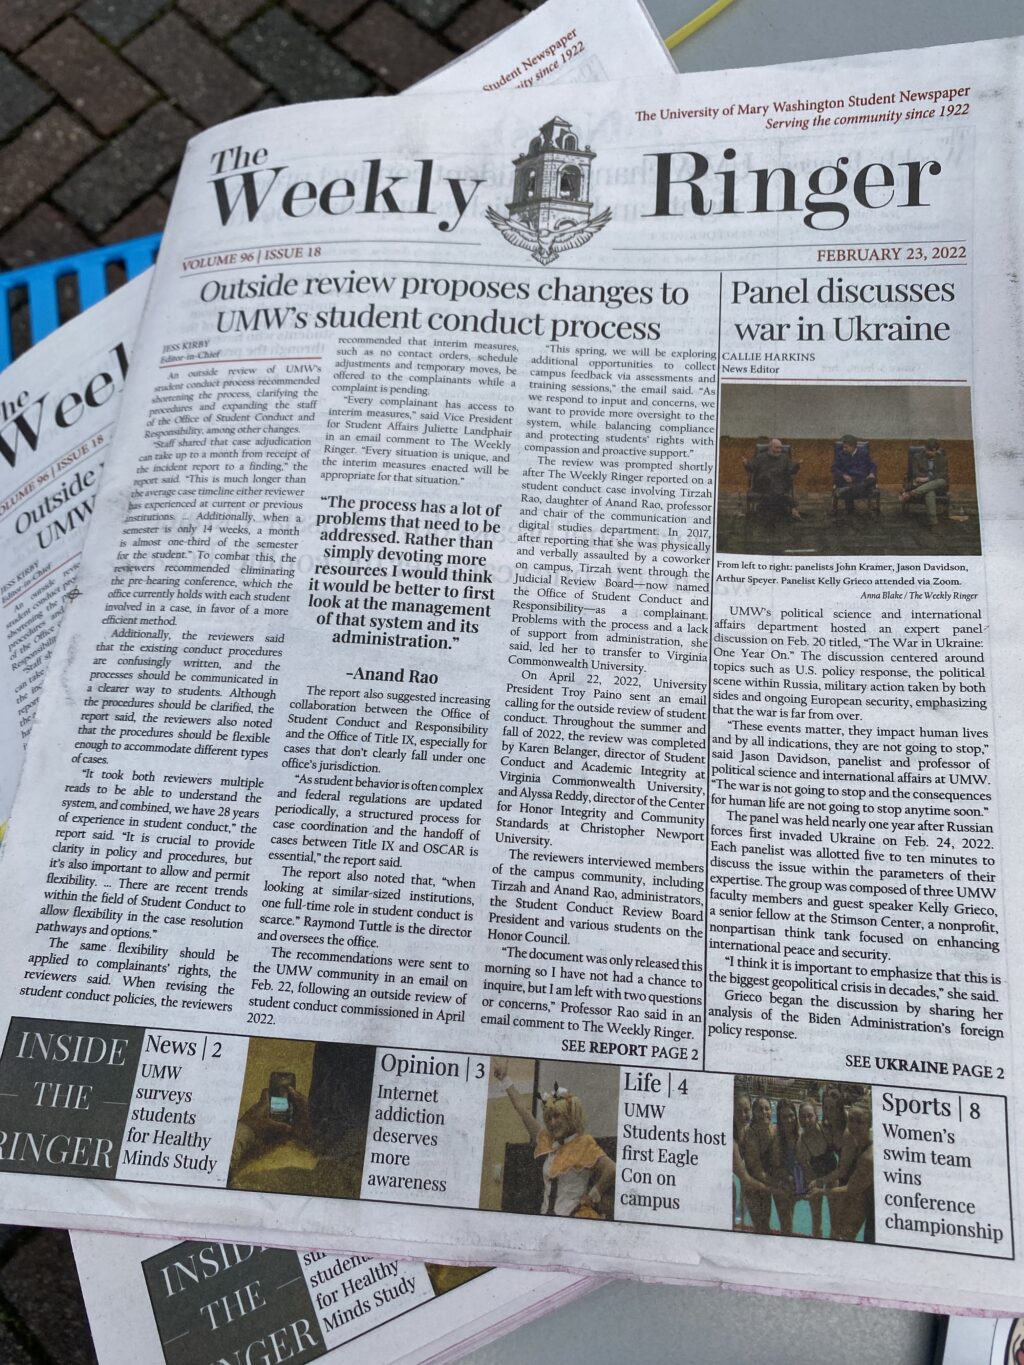 Photo of the student newspaper front page